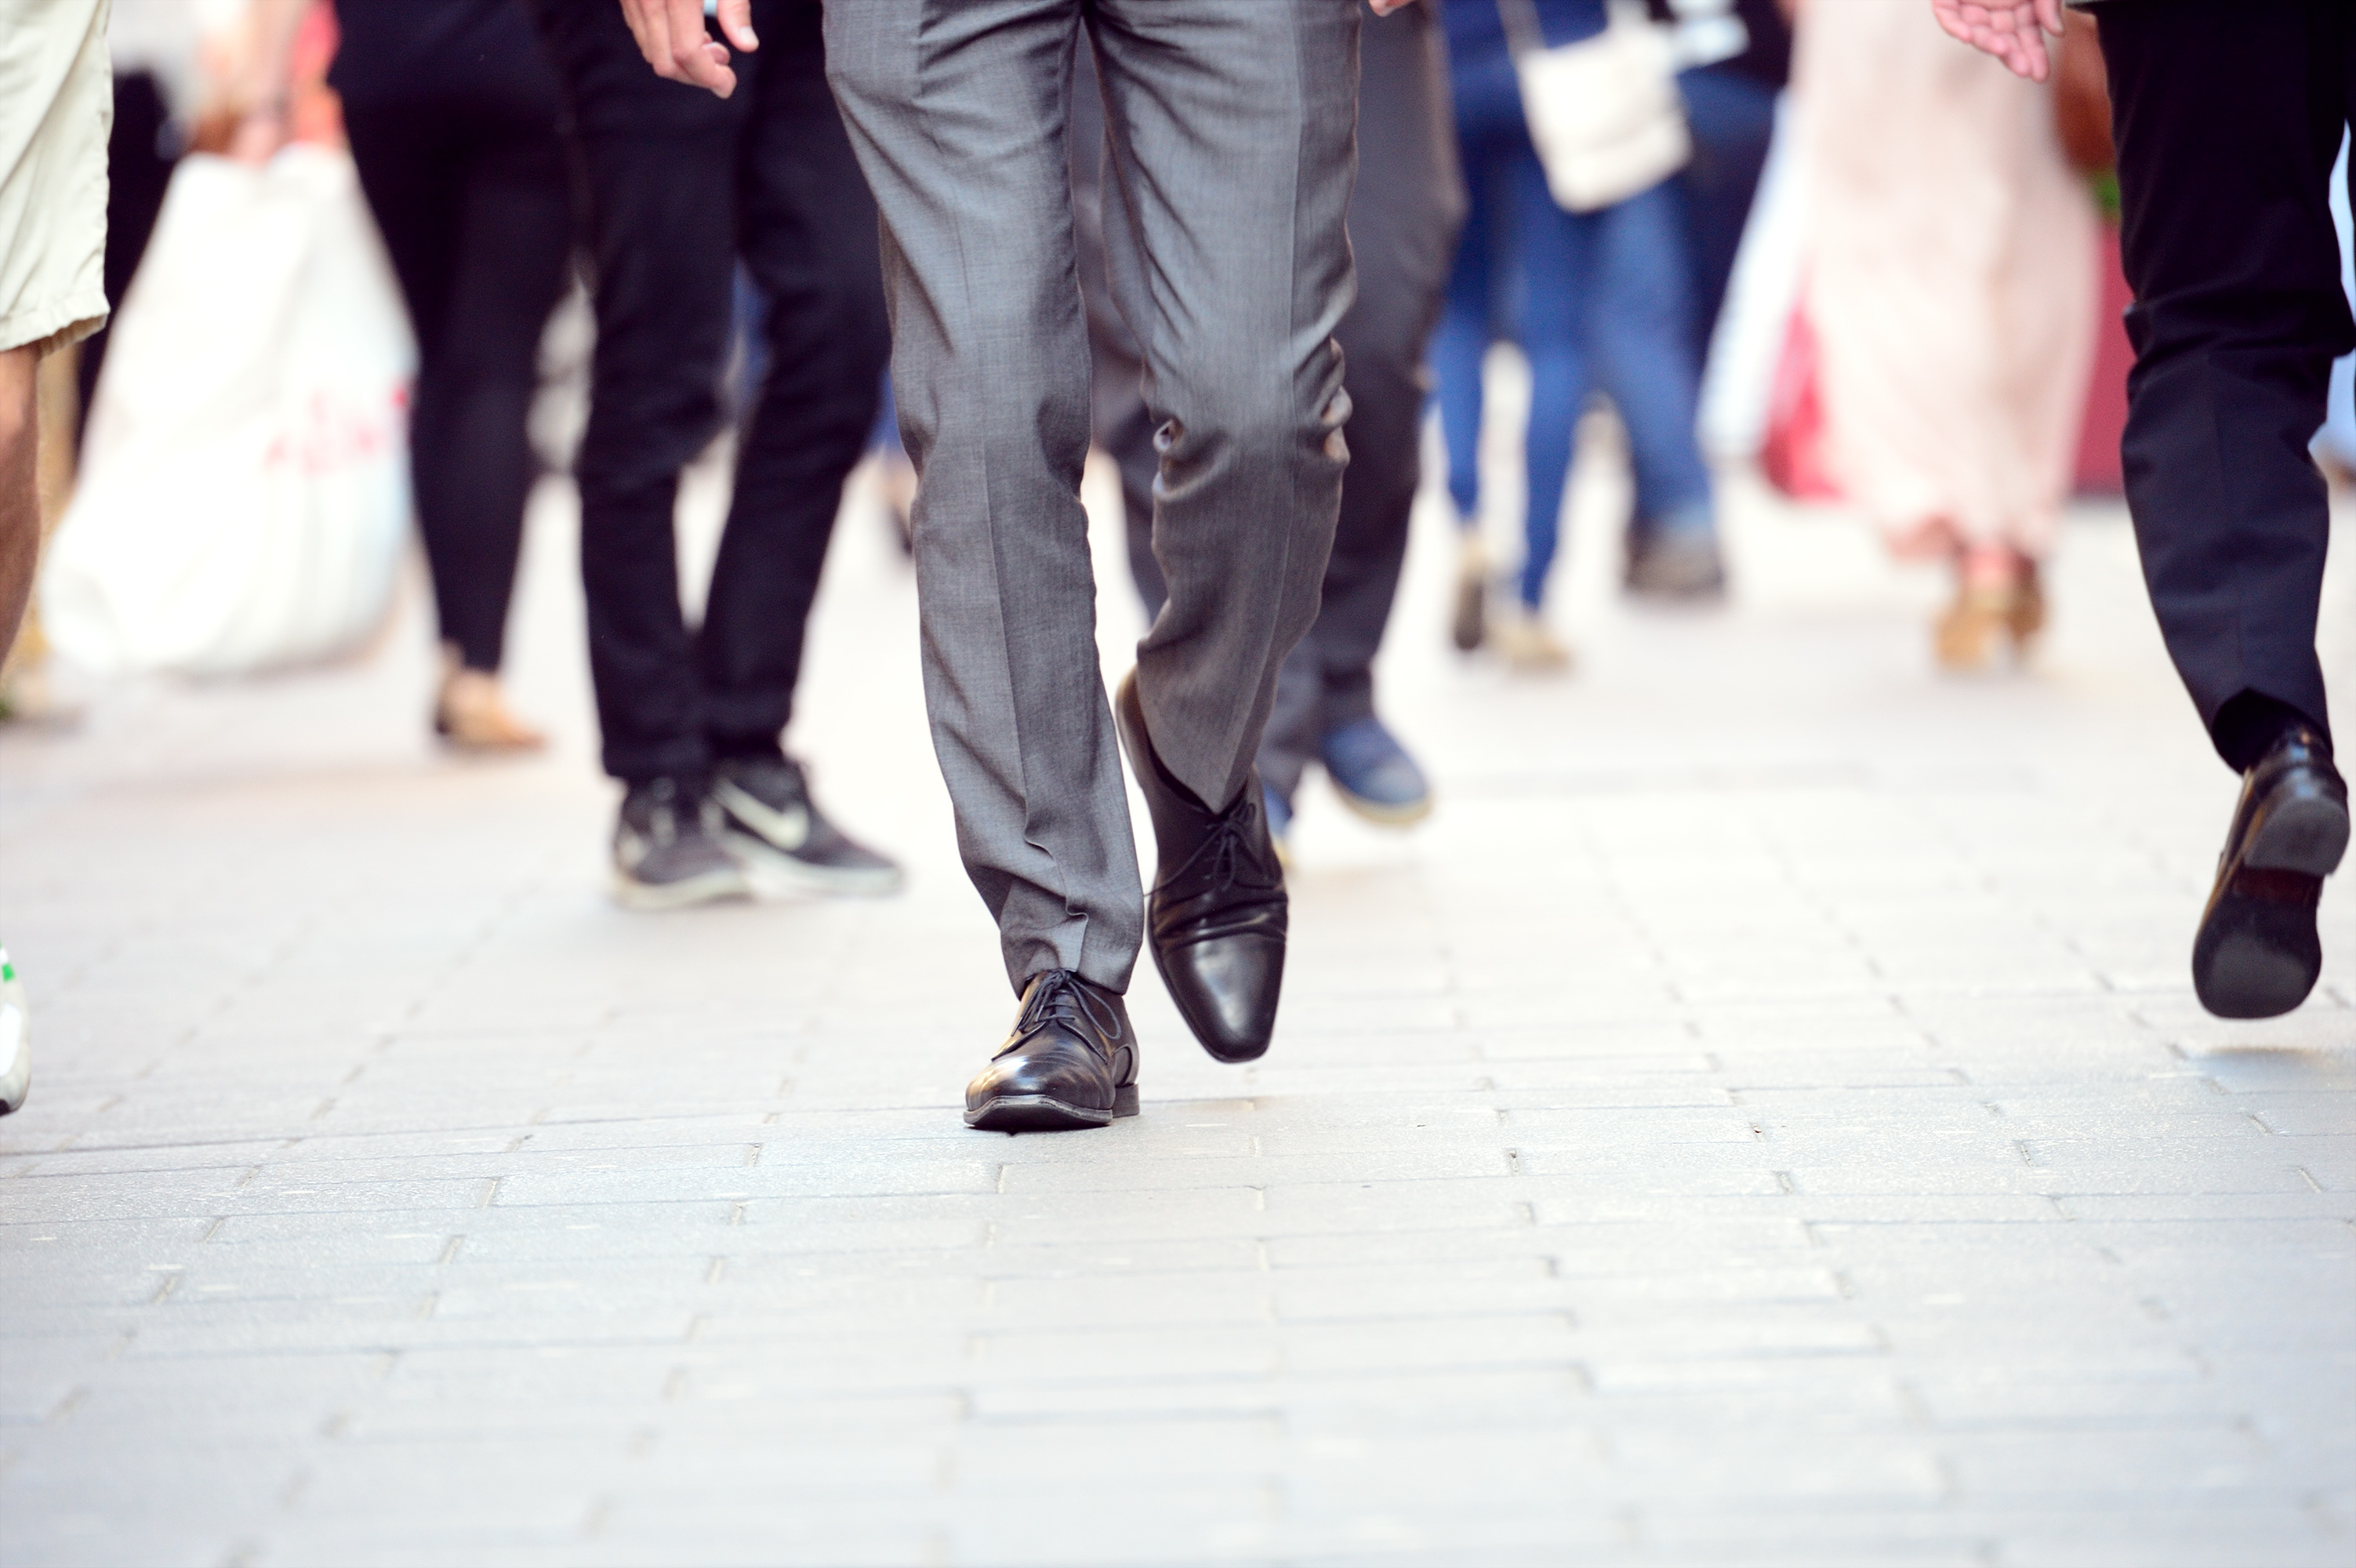 Healthy Living: The Benefits of Walking at Work